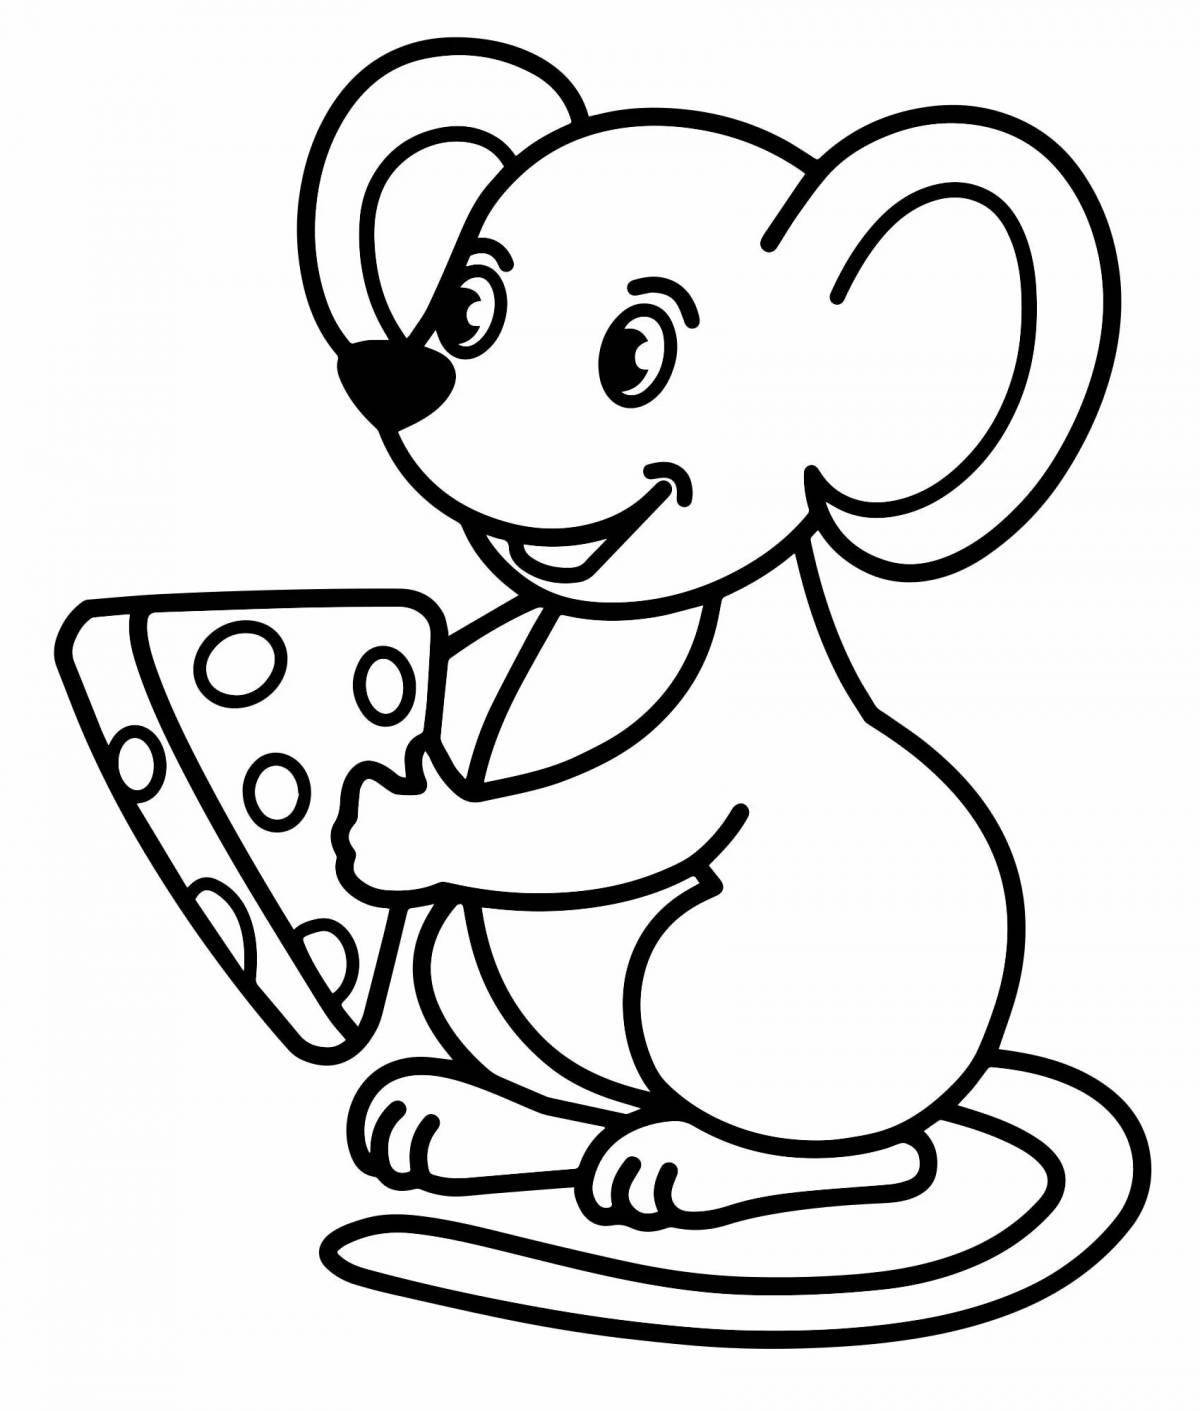 Glitter coloring mouse for children 2-3 years old